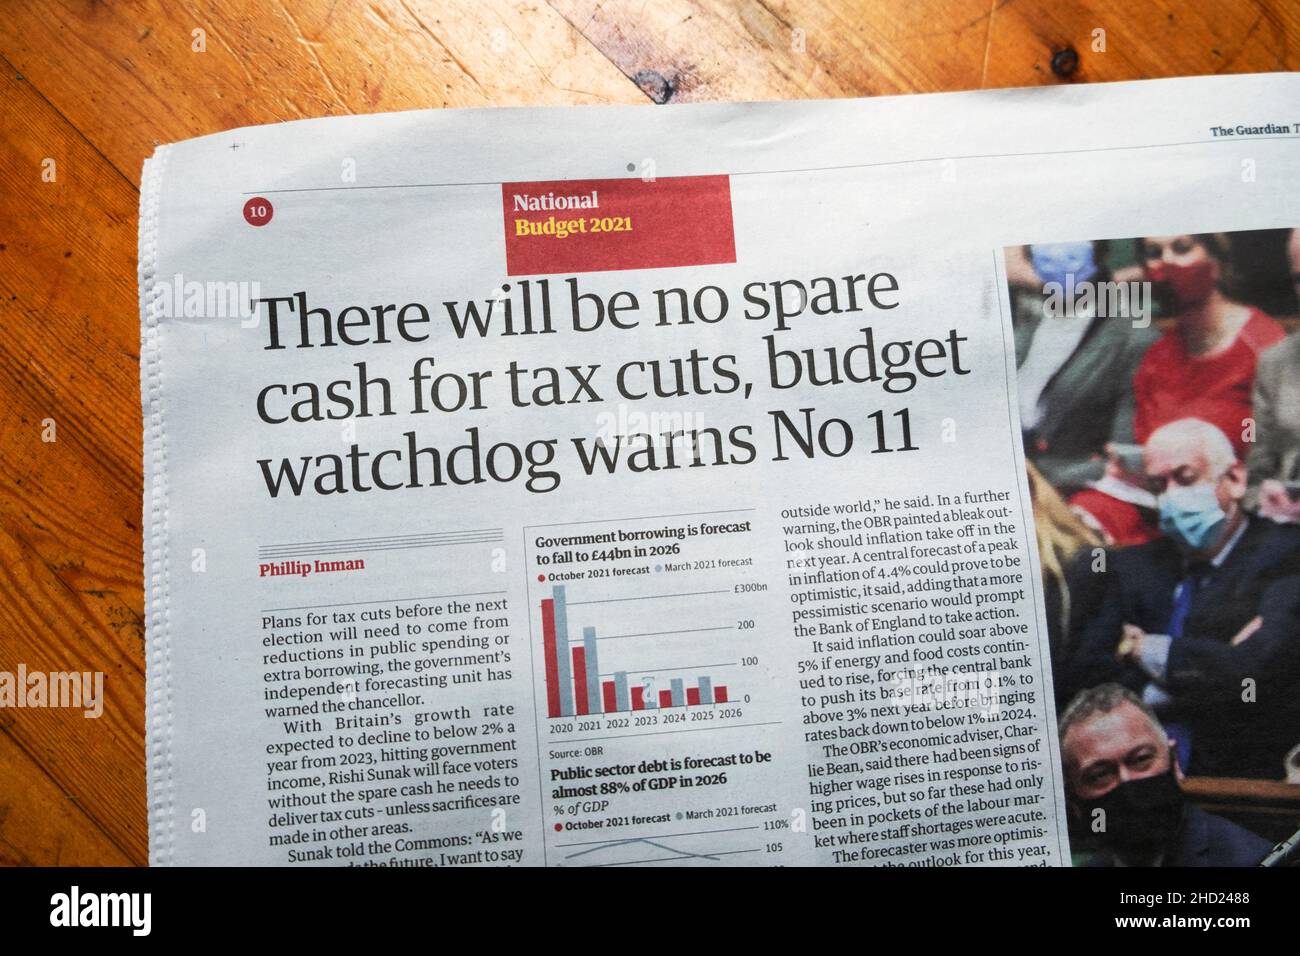 'There will be no spare cash for tax cuts, budget watchdog warns No11' 2021 Budget Guardian newspaper headline article clipping London UK Stock Photo